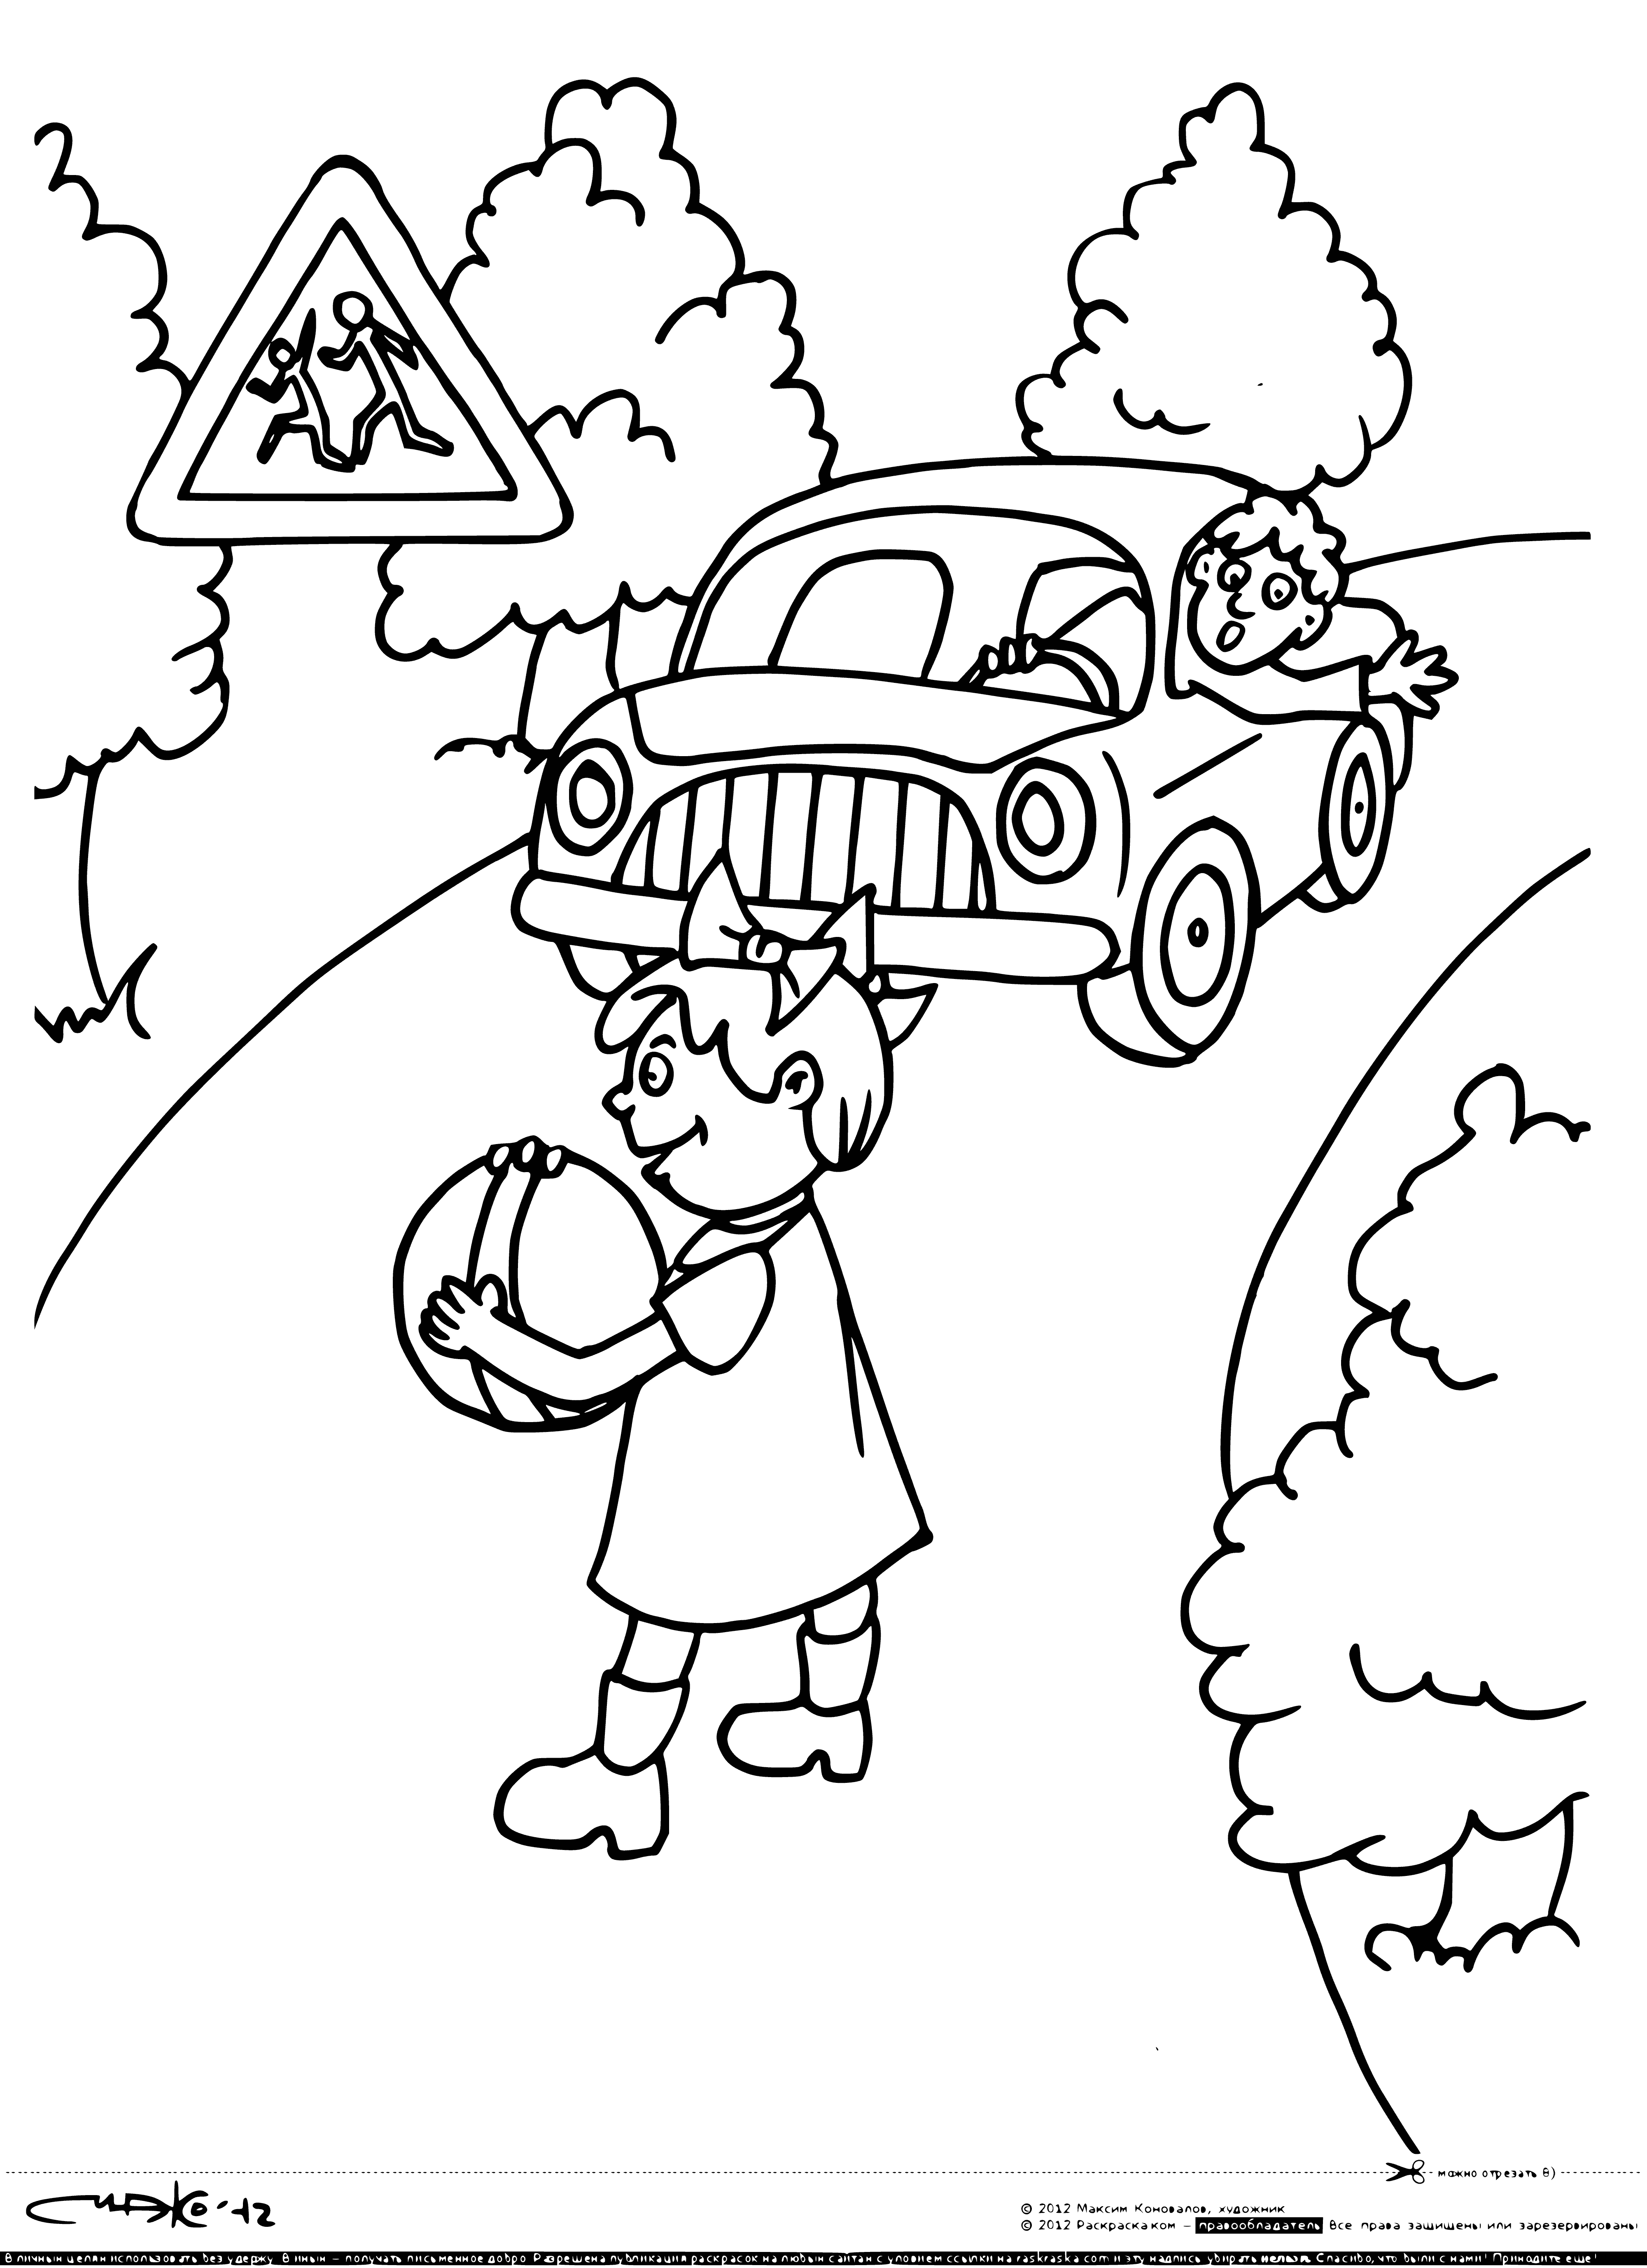 coloring page: Caution sign warns of potential danger of children playing on the street, with an illustration of a SUV driving by.